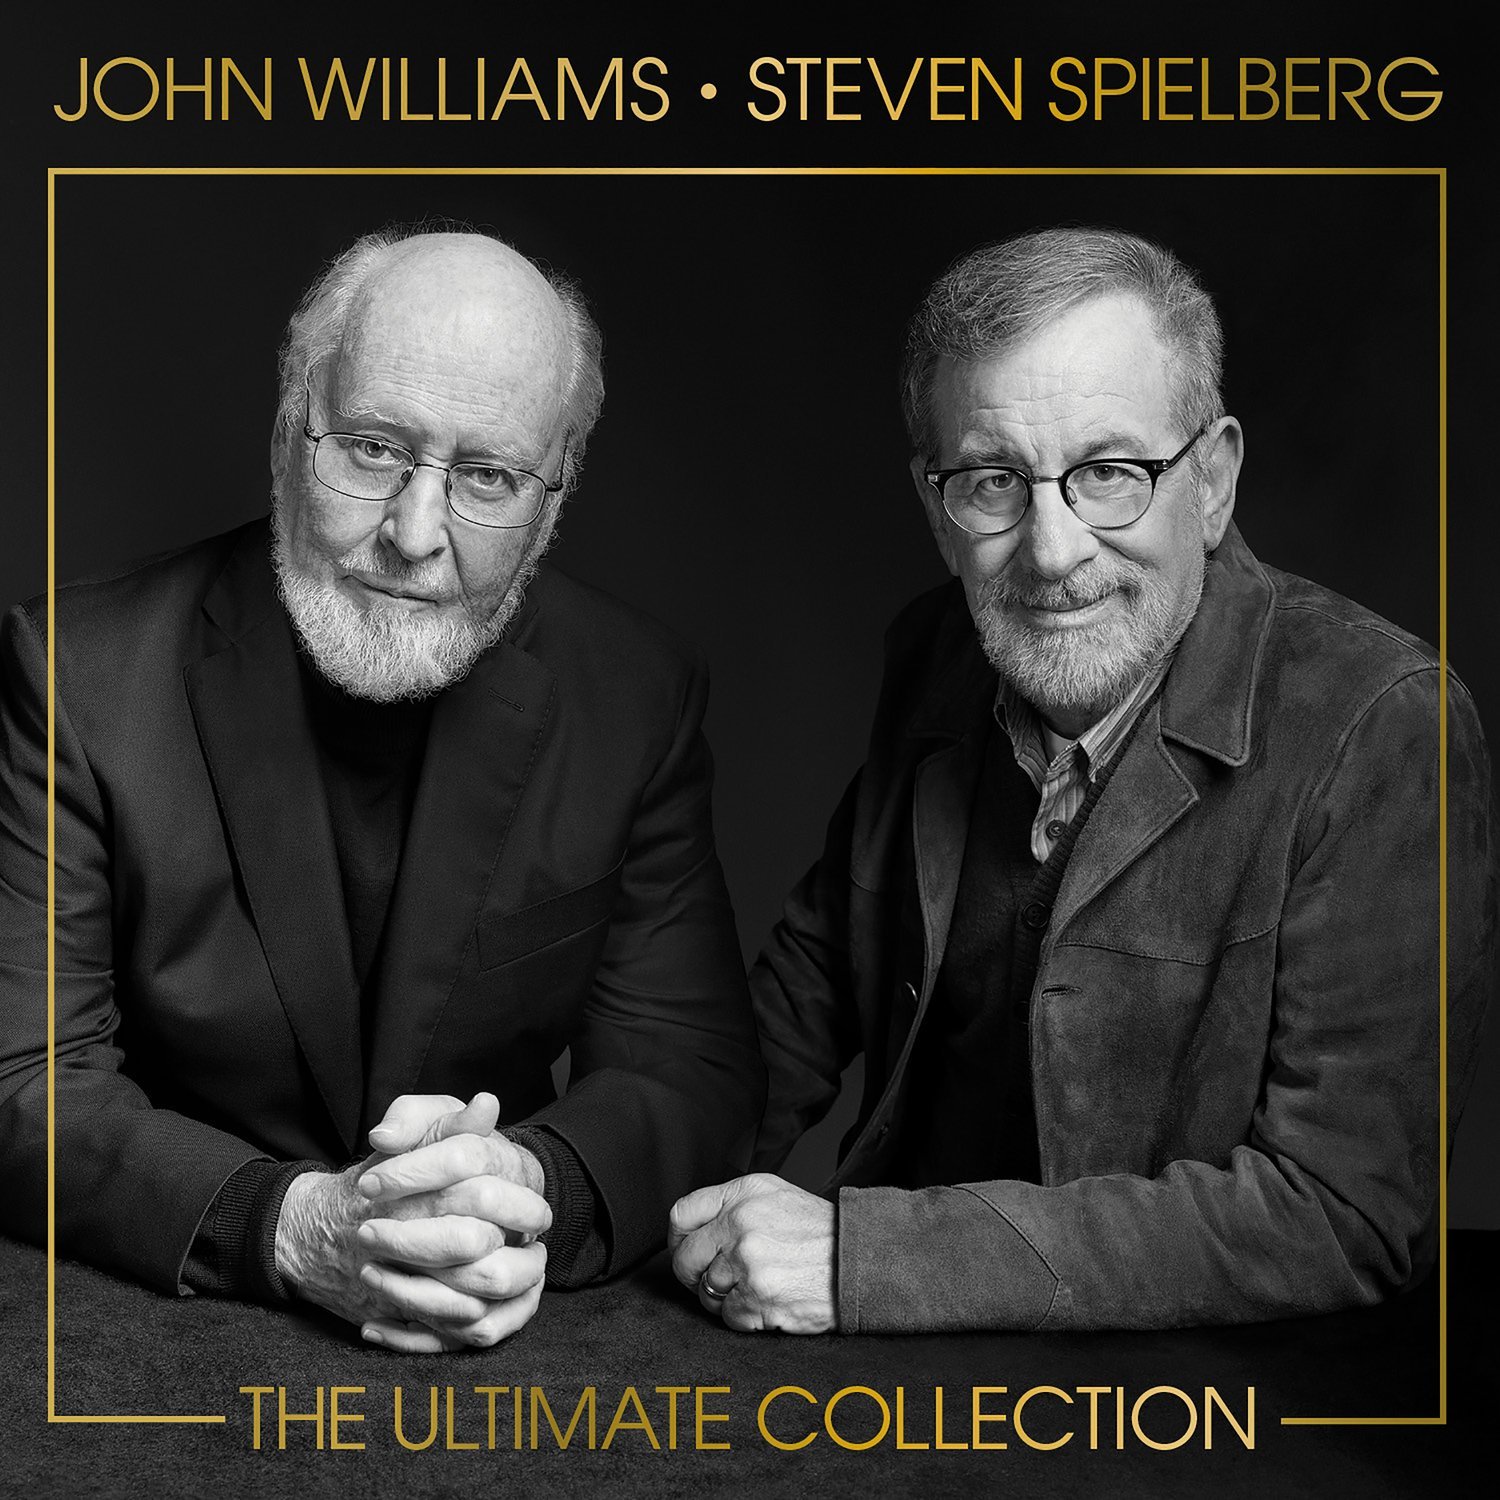 Couverture de : John Williams, Steven Spielberg : the ultimate collection : John Williams conducts music for the films of Steven Spielberg